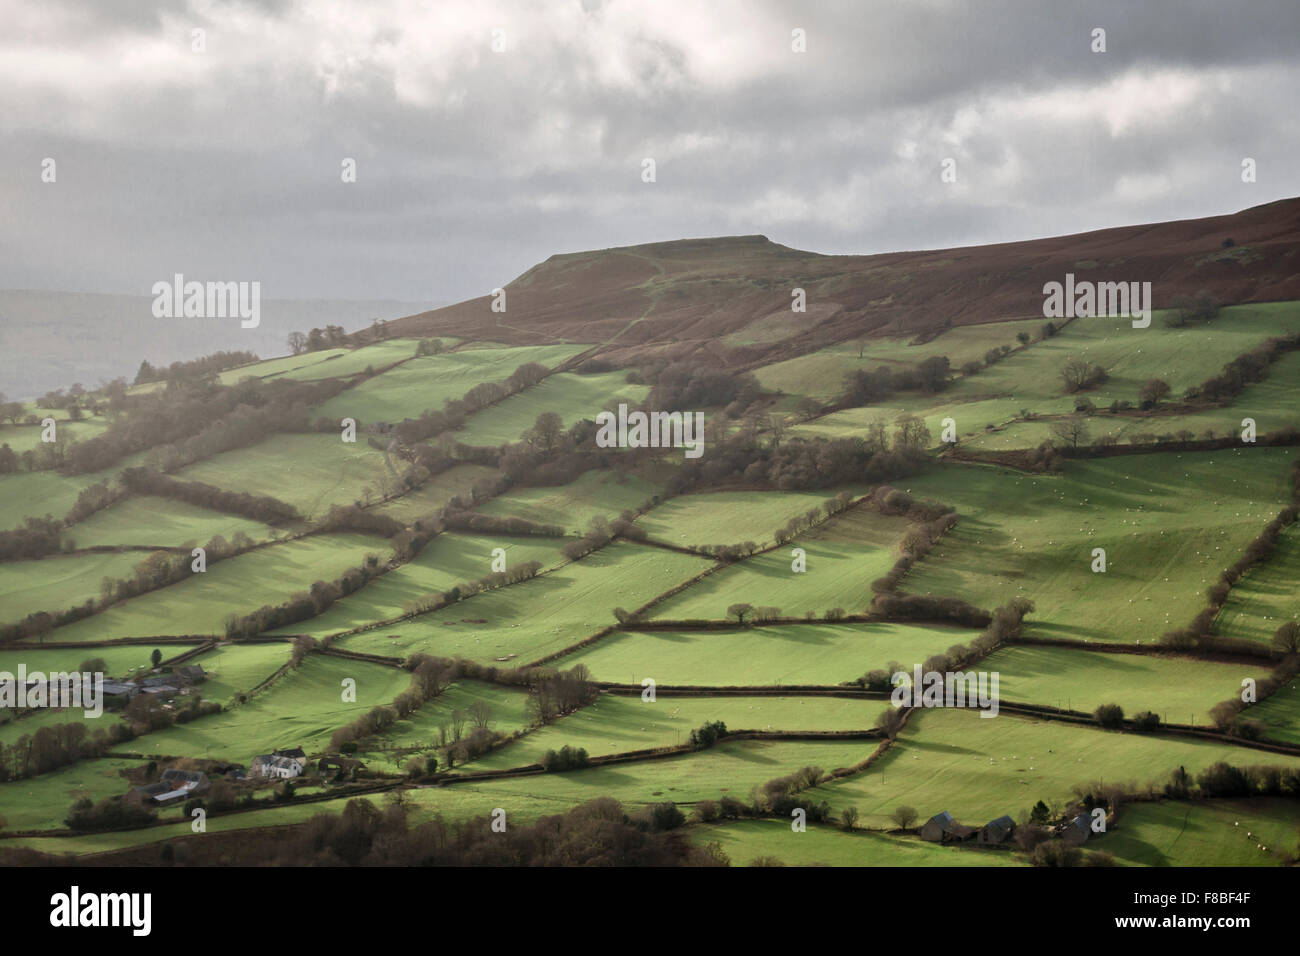 Table Mountain (Crug Hywel) above the village of Llanbedr near Crickhowell, Powys, Wales, UK. It is part of the Black Mountains. Stock Photo